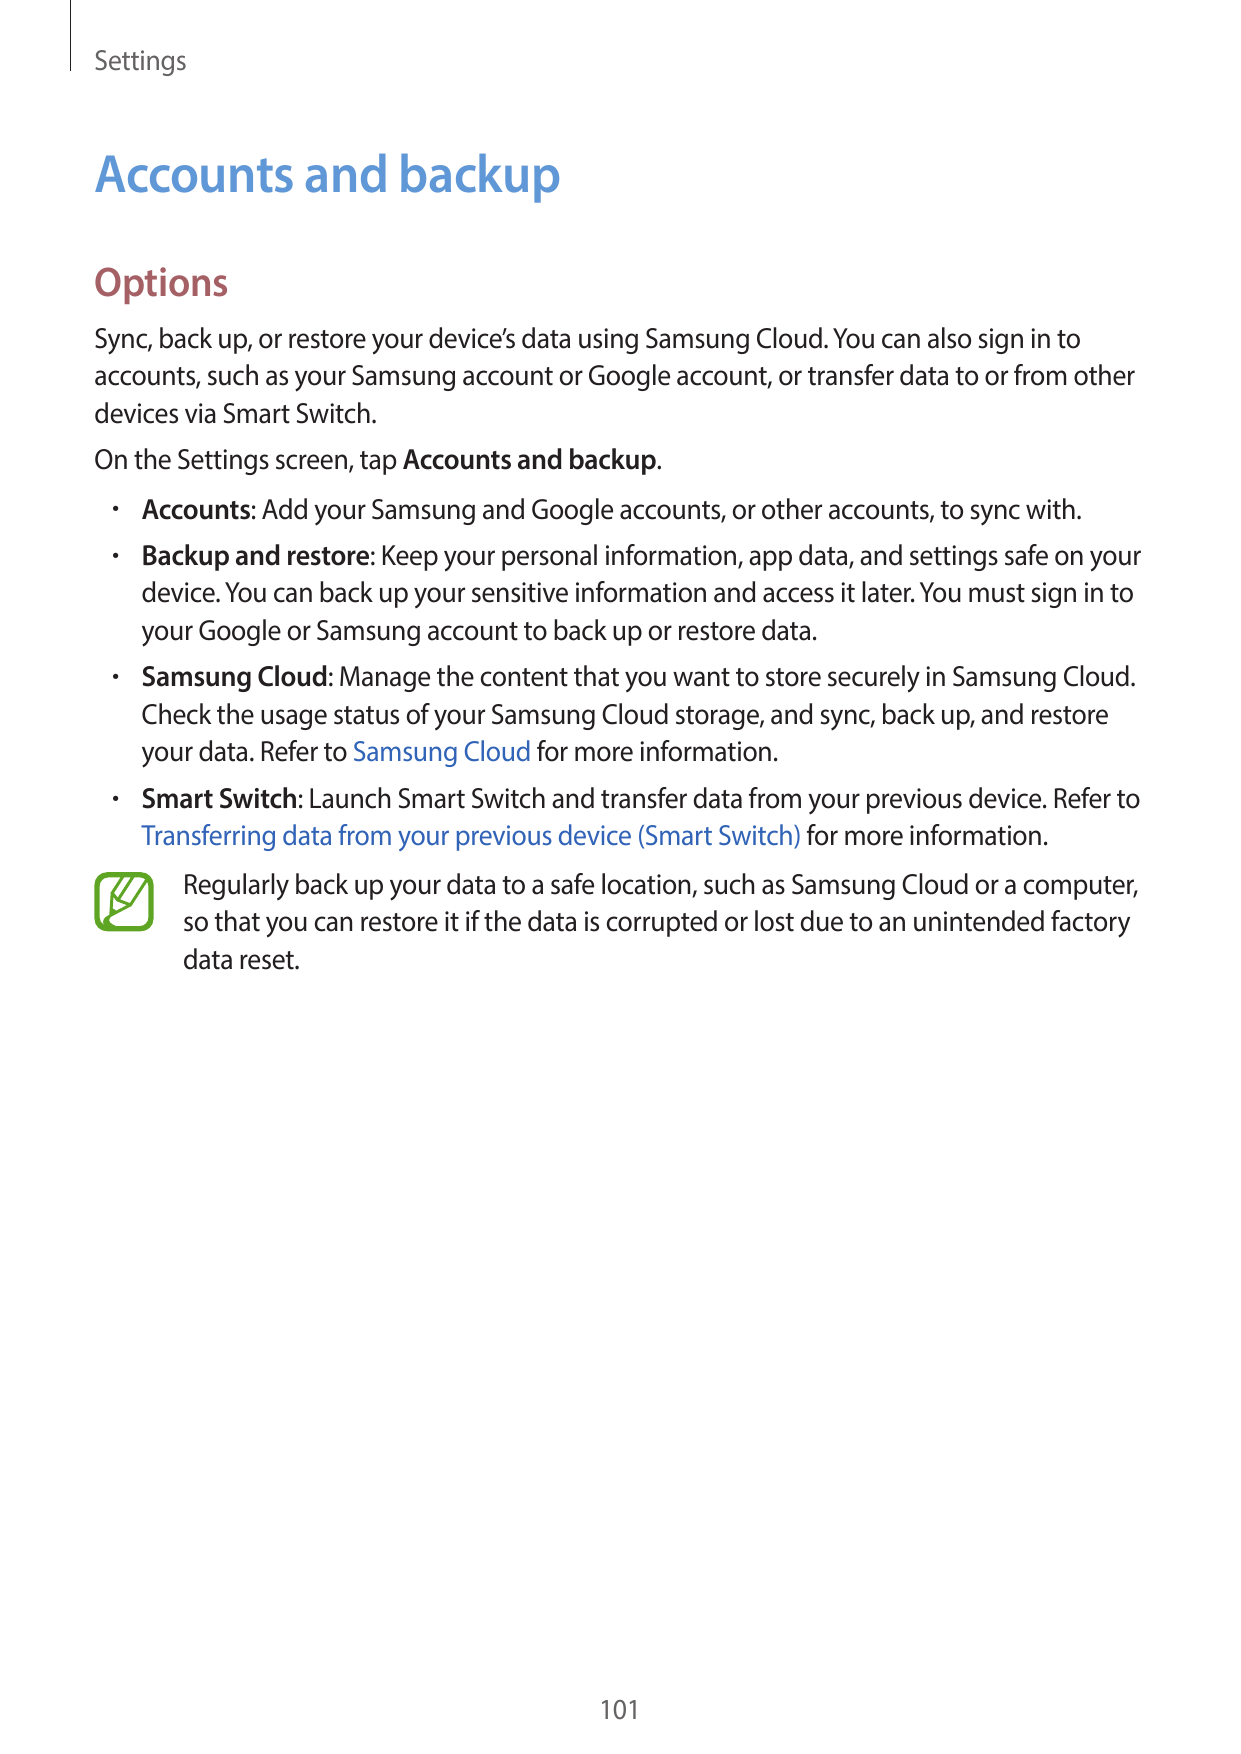 SettingsAccounts and backupOptionsSync, back up, or restore your device’s data using Samsung Cloud. You can also sign in toaccou